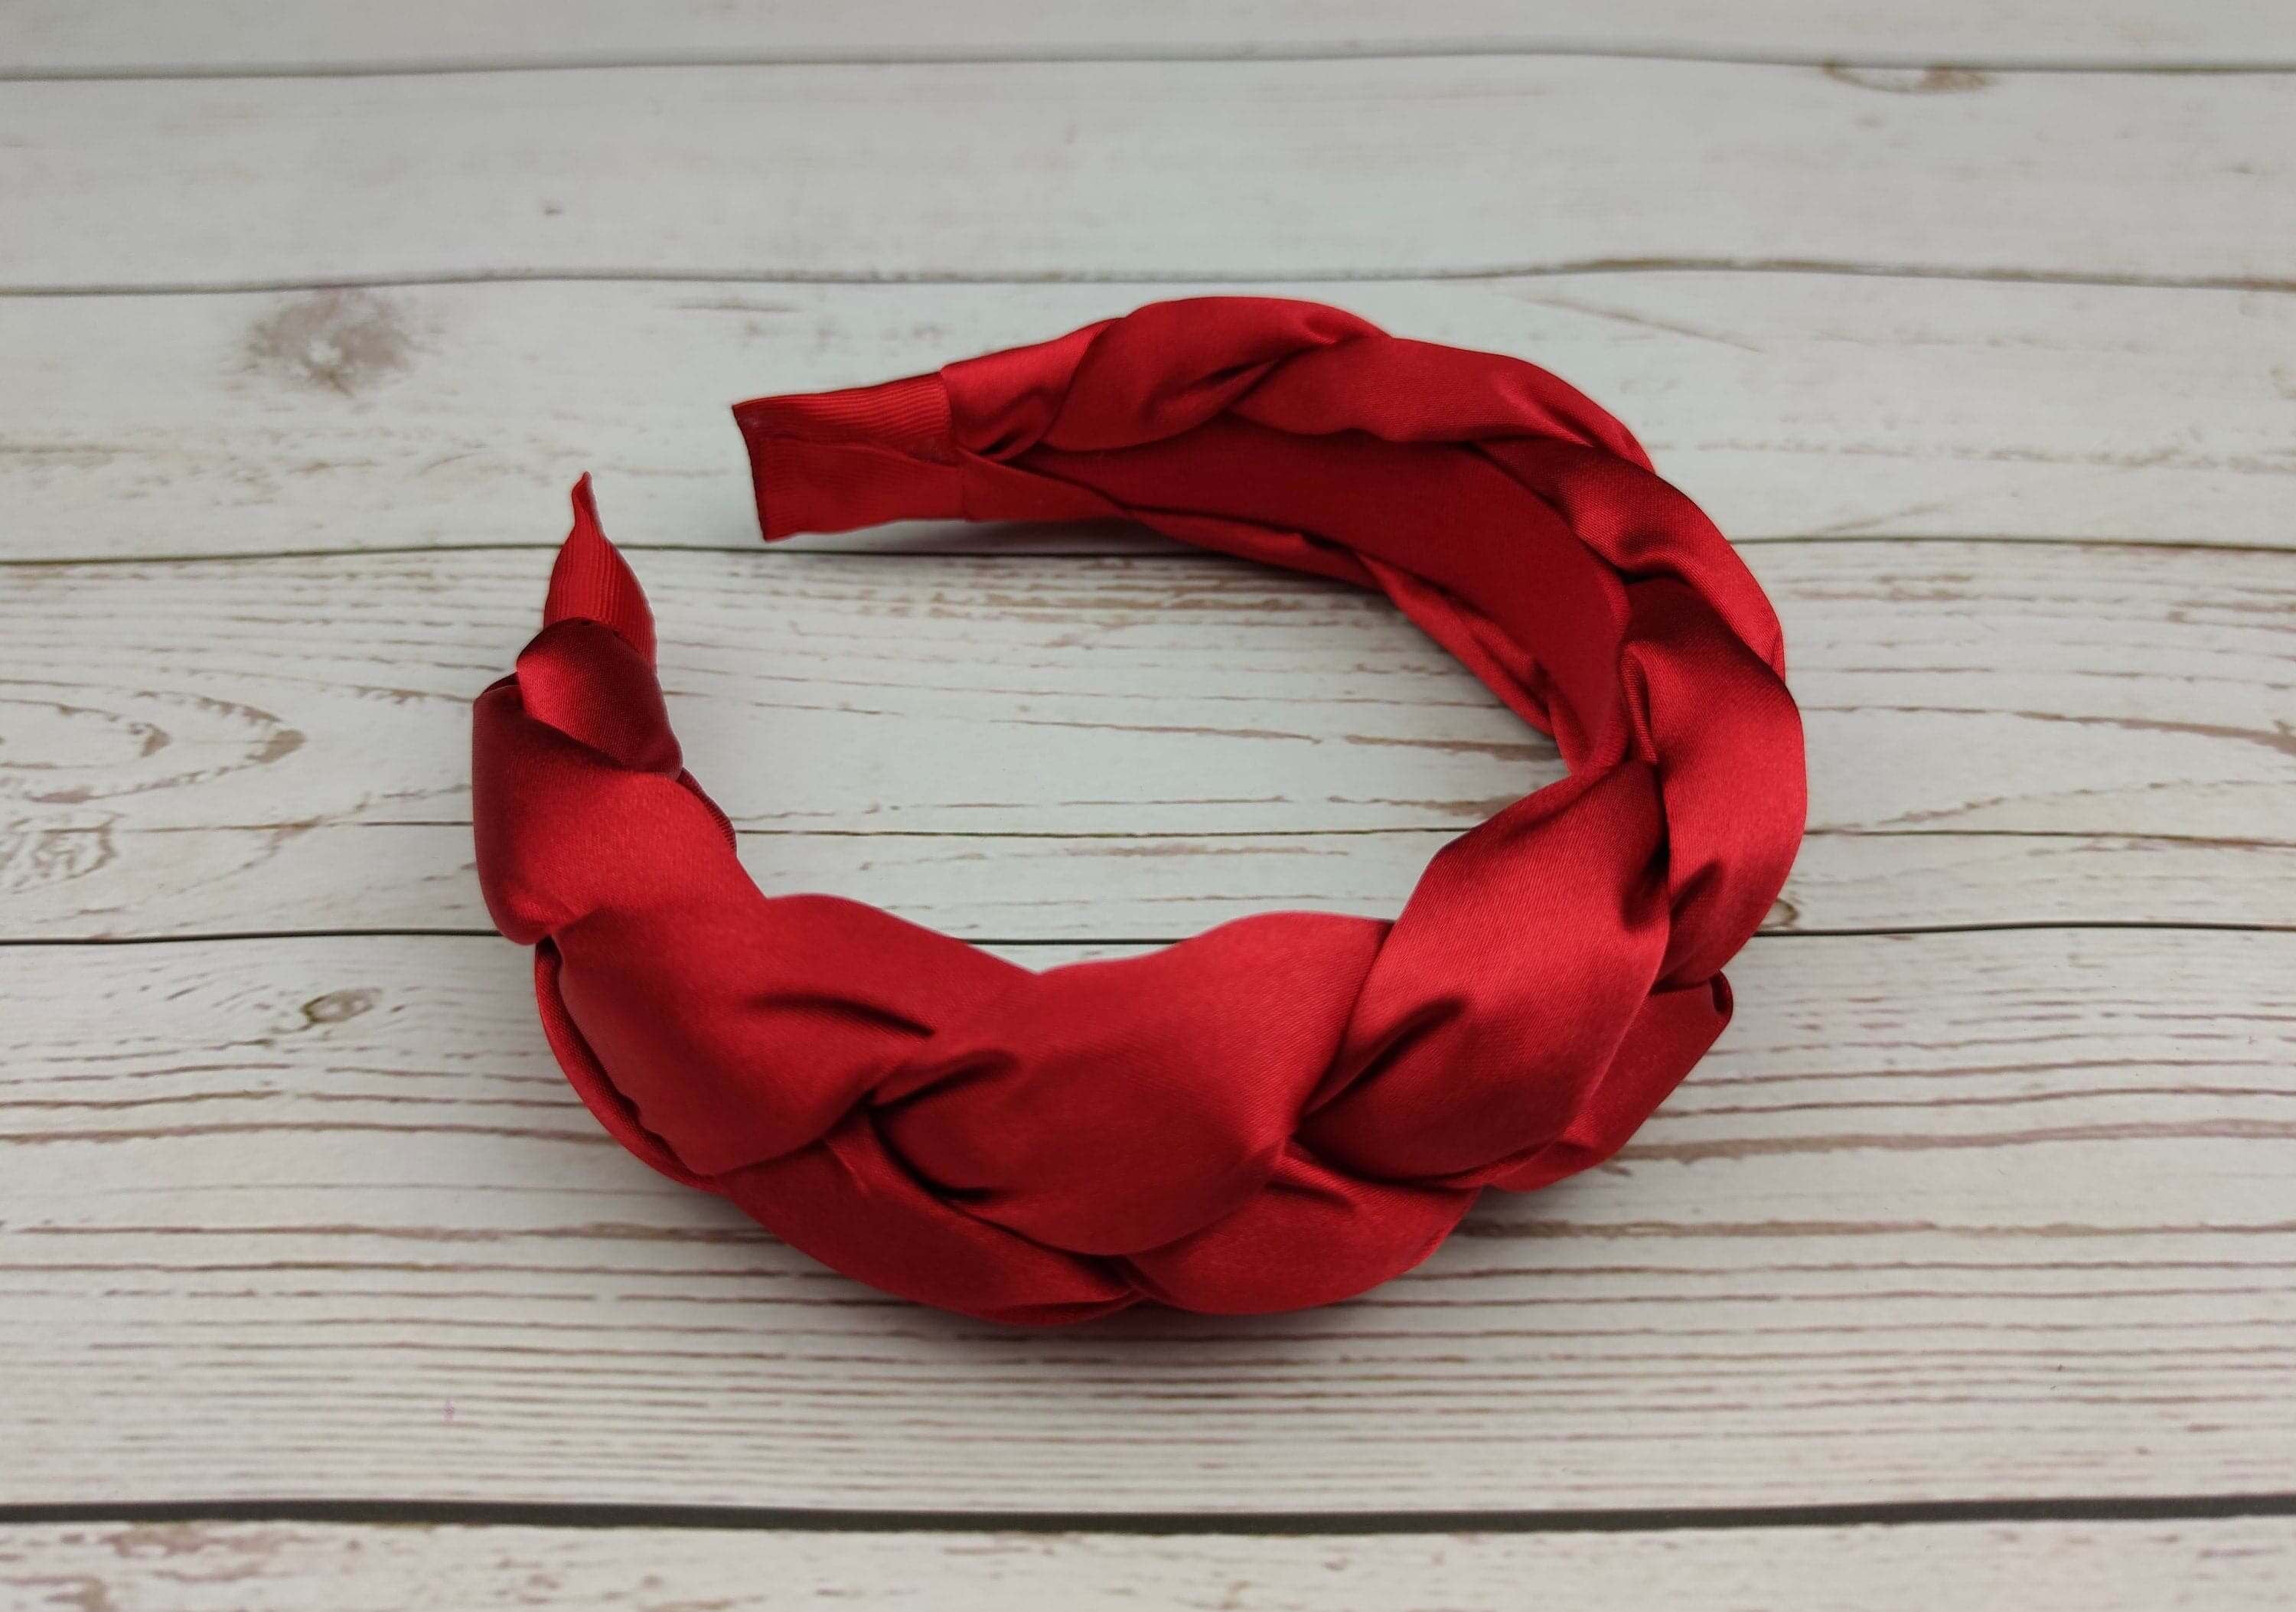 Elevate your accessory game with this beautiful and sophisticated red satin braided headband for women.